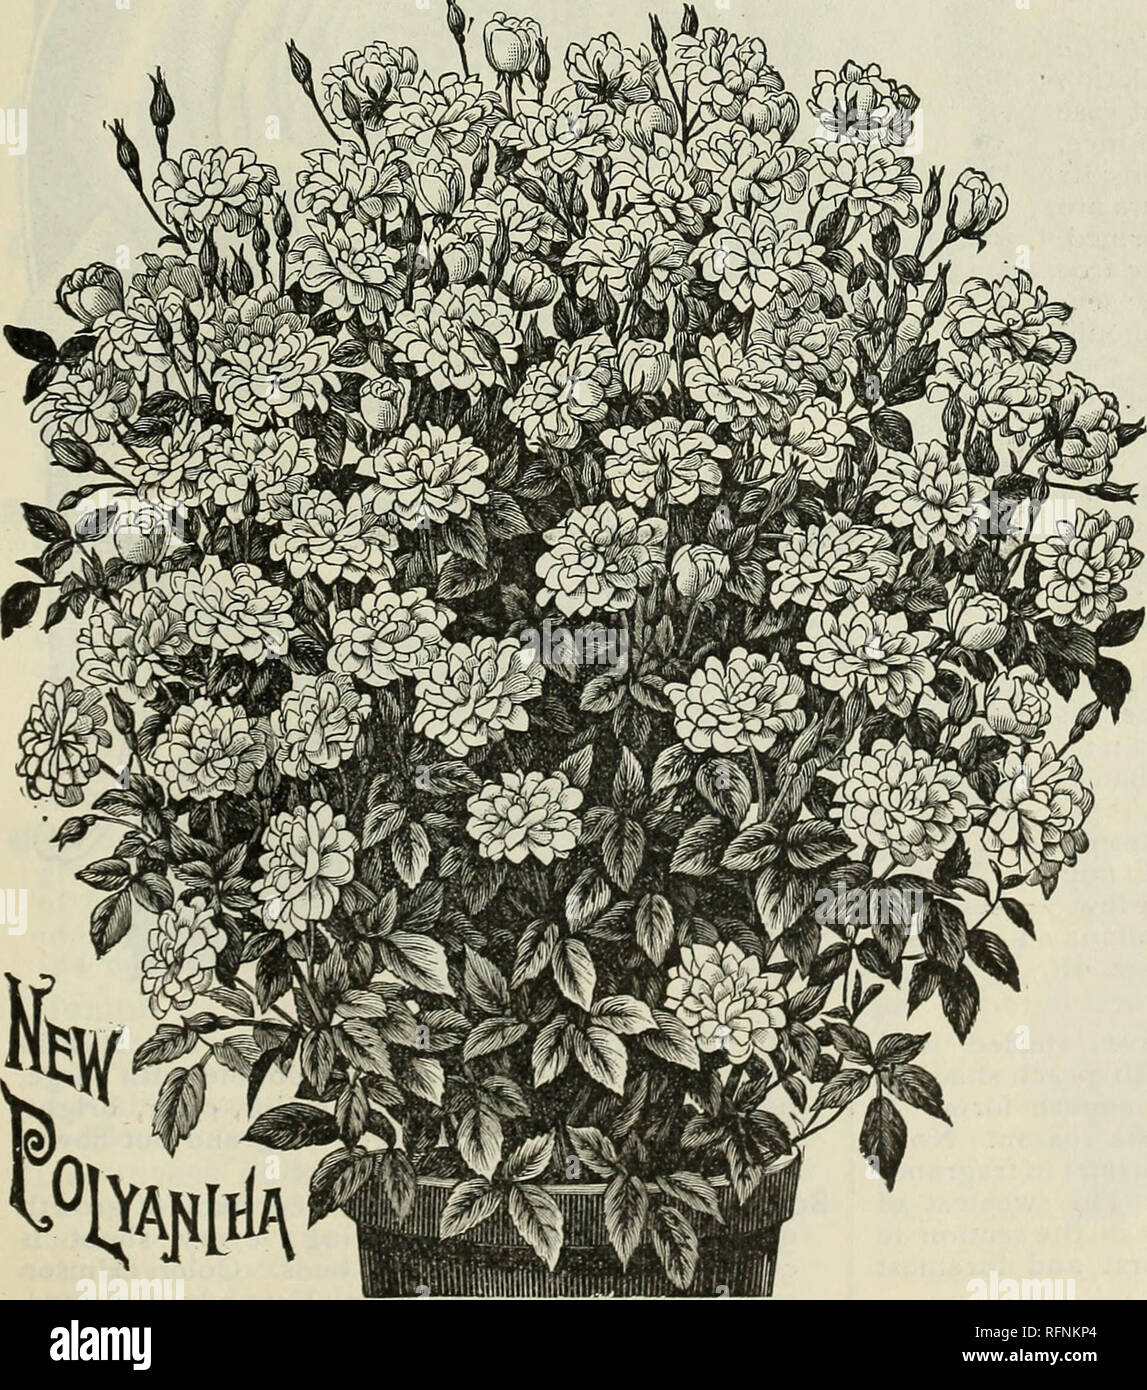 . Spring 1896. Nursery stock Ohio Catalogs; Vegetables Seeds Catalogs; Plants, Ornamental Catalogs; Fruit trees Seedlings Catalogs; Fruit Catalogs; Trees Seedlings Catalogs; Nursery stock; Vegetables; Plants, Ornamental; Fruit trees; Fruit; Trees. Sombreuil. Large, fine formed flowers; white, tinted delicate rose; blooms in clusters. 15c. SafPano. Bright apricot yellow, changing to orange and fawn, sometimes tinted with rose; valued highly for its beautiful buds ; fragrant. The Queen. A pure white rose, elegant shape and very large size. A vigorous and healthy grower and continuous bloomer, pr Stock Photo